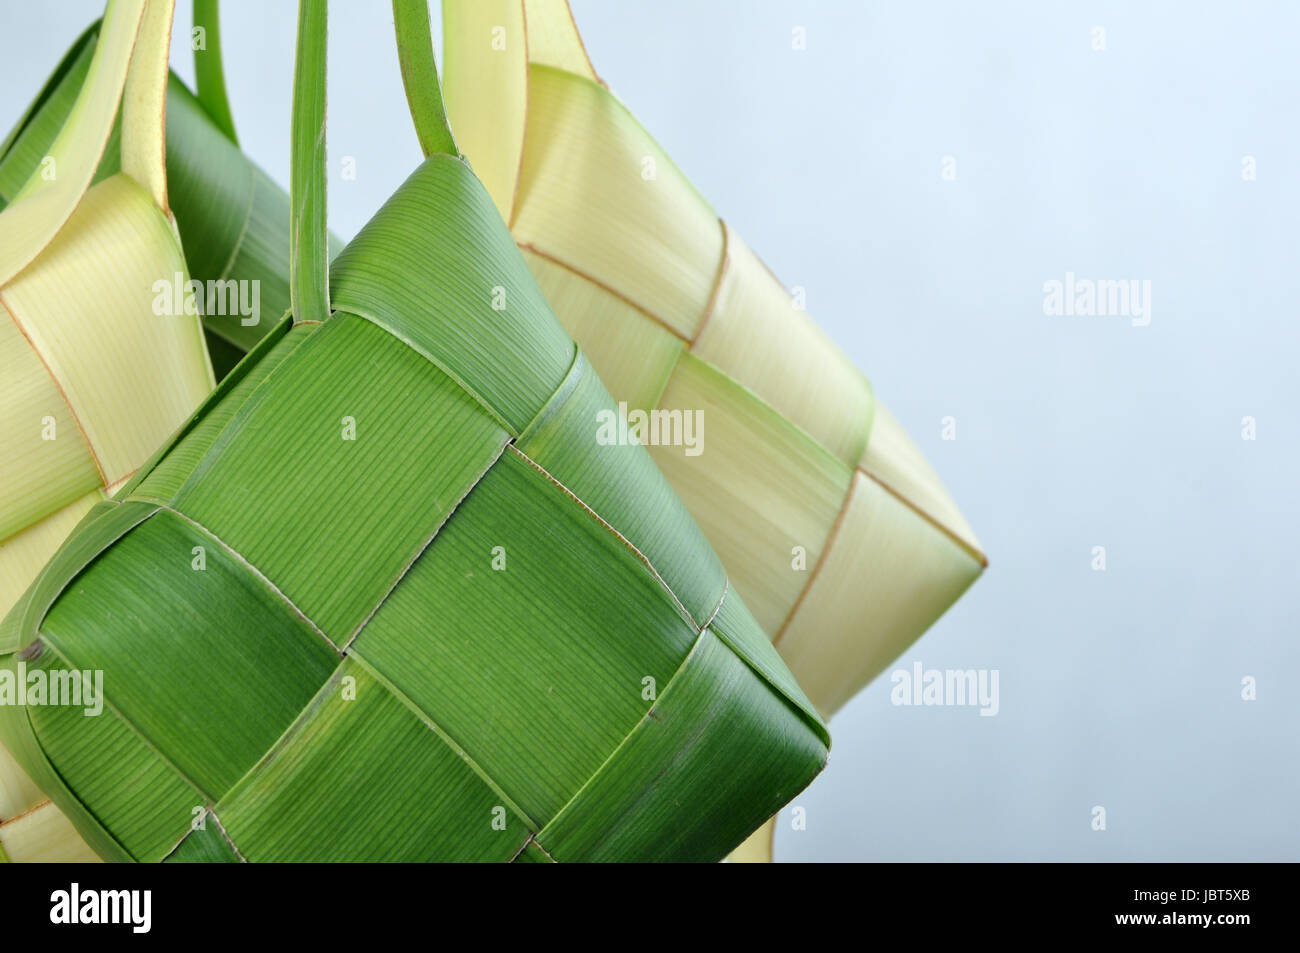 Ketupat, a type of dumpling made from rice packed inside a diamond-shaped container of woven palm leaf pouch. commonly found in Indonesia & Malaysia. Stock Photo